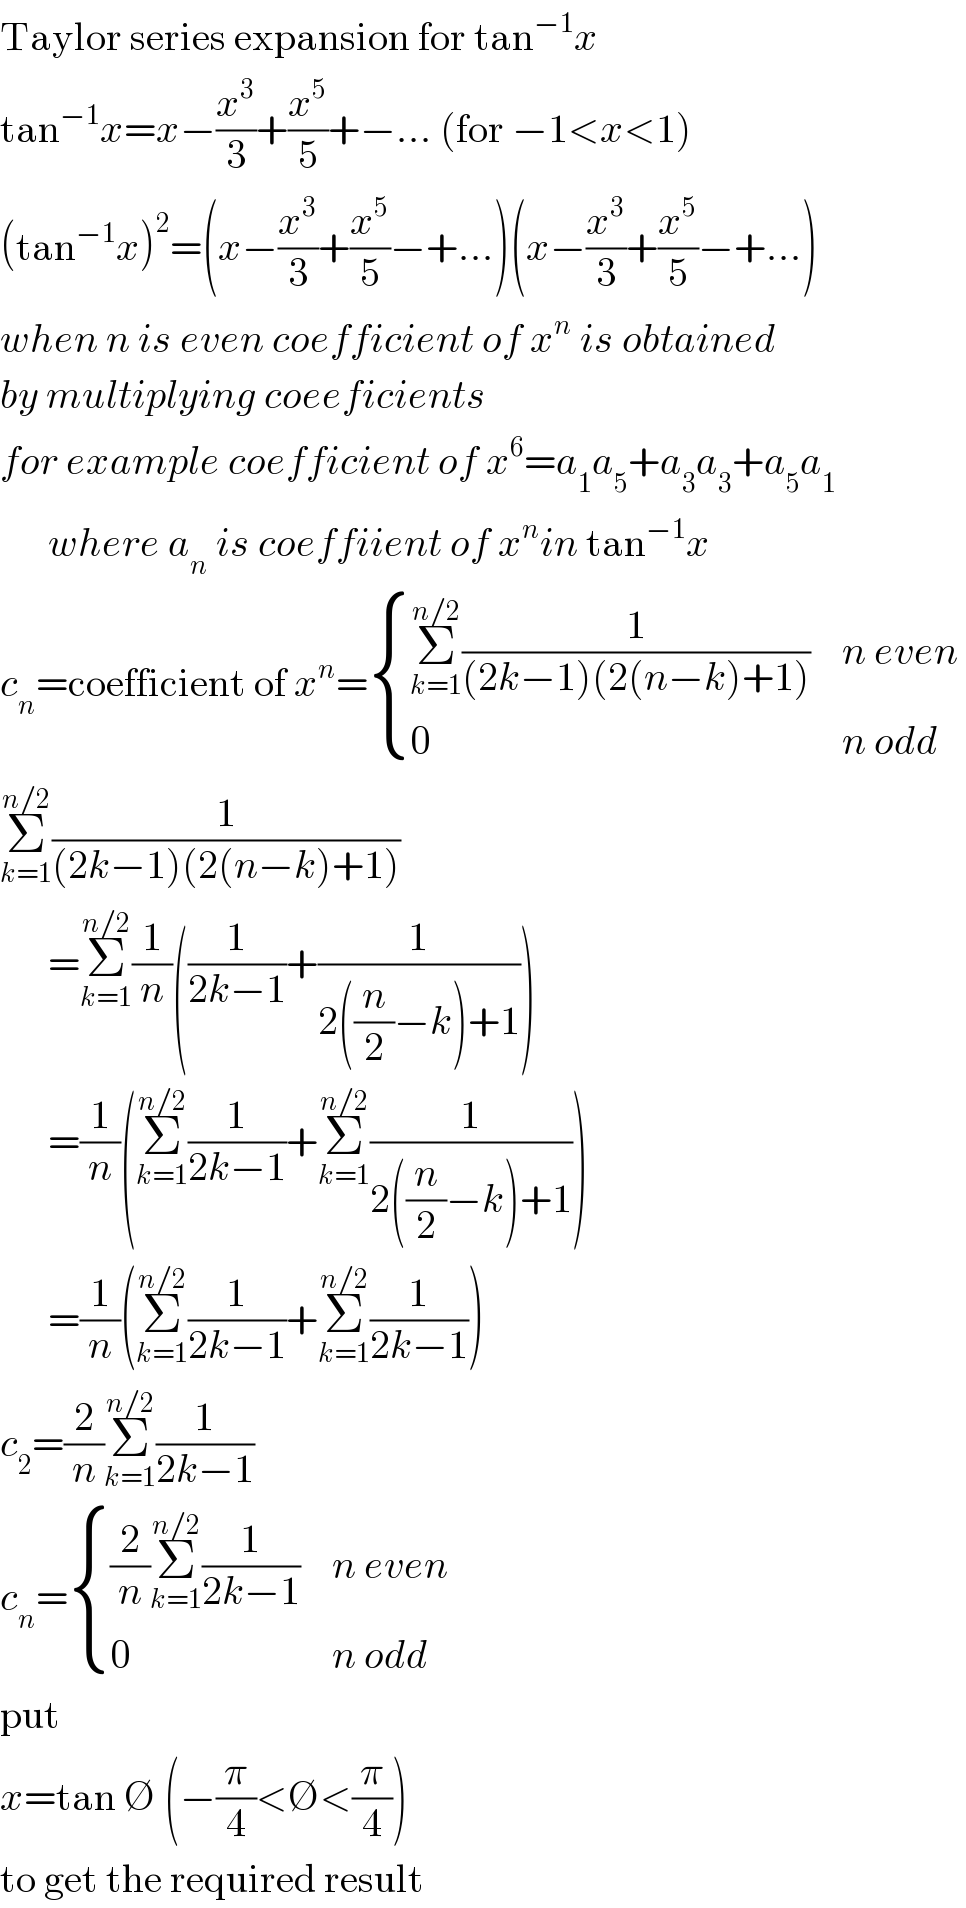 Taylor series expansion for tan^(−1) x  tan^(−1) x=x−(x^3 /3)+(x^5 /5)+−... (for −1<x<1)  (tan^(−1) x)^2 =(x−(x^3 /3)+(x^5 /5)−+...)(x−(x^3 /3)+(x^5 /5)−+...)  when n is even coefficient of x^n  is obtained  by multiplying coeeficients  for example coefficient of x^6 =a_1 a_5 +a_3 a_3 +a_5 a_1          where a_n  is coeffiient of x^n in tan^(−1) x  c_n =coefficient of x^n = { ((Σ_(k=1) ^(n/2) (1/((2k−1)(2(n−k)+1)))),(n even)),(0,(n odd)) :}   Σ_(k=1) ^(n/2) (1/((2k−1)(2(n−k)+1)))        =Σ_(k=1) ^(n/2) (1/n)((1/(2k−1))+(1/(2((n/2)−k)+1)))        =(1/n)(Σ_(k=1) ^(n/2) (1/(2k−1))+Σ_(k=1) ^(n/2) (1/(2((n/2)−k)+1)))        =(1/n)(Σ_(k=1) ^(n/2) (1/(2k−1))+Σ_(k=1) ^(n/2) (1/(2k−1)))  c_2 =(2/n)Σ_(k=1) ^(n/2) (1/(2k−1))  c_n = { (((2/n)Σ_(k=1) ^(n/2) (1/(2k−1))),(n even)),(0,(n odd)) :}  put  x=tan ∅ (−(π/4)<∅<(π/4))  to get the required result  